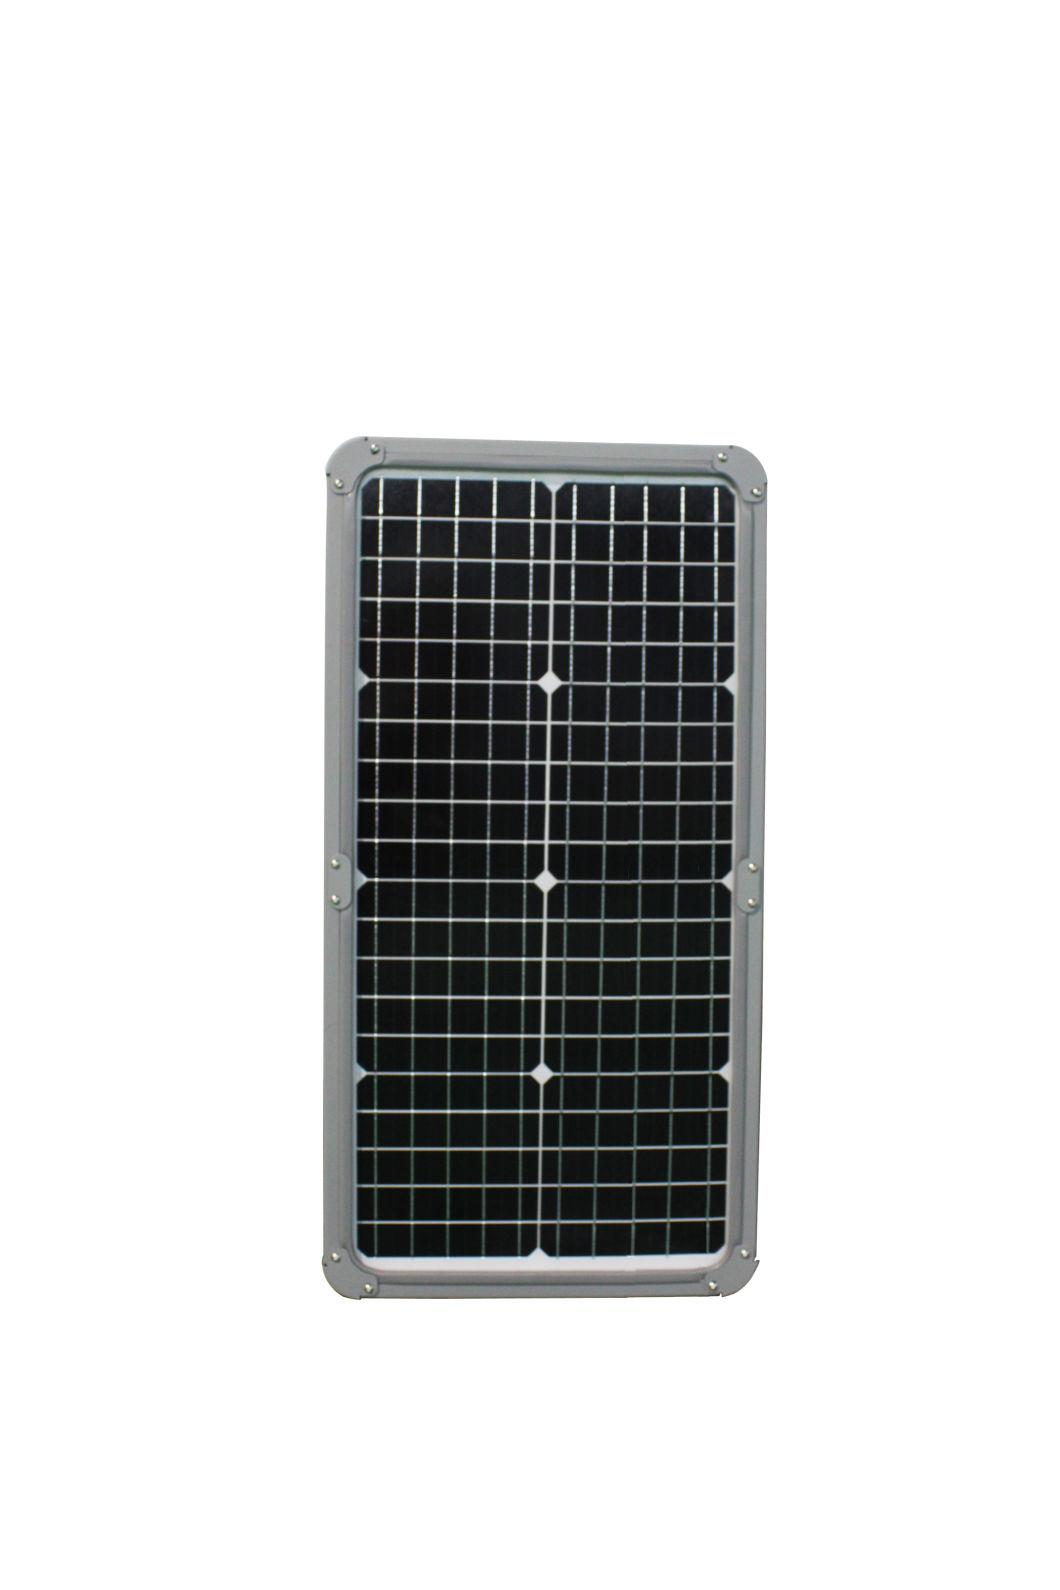 Professional Manufacture Solar LED Street Lamp Photovoltaic Outdoor 80W 100W 120W